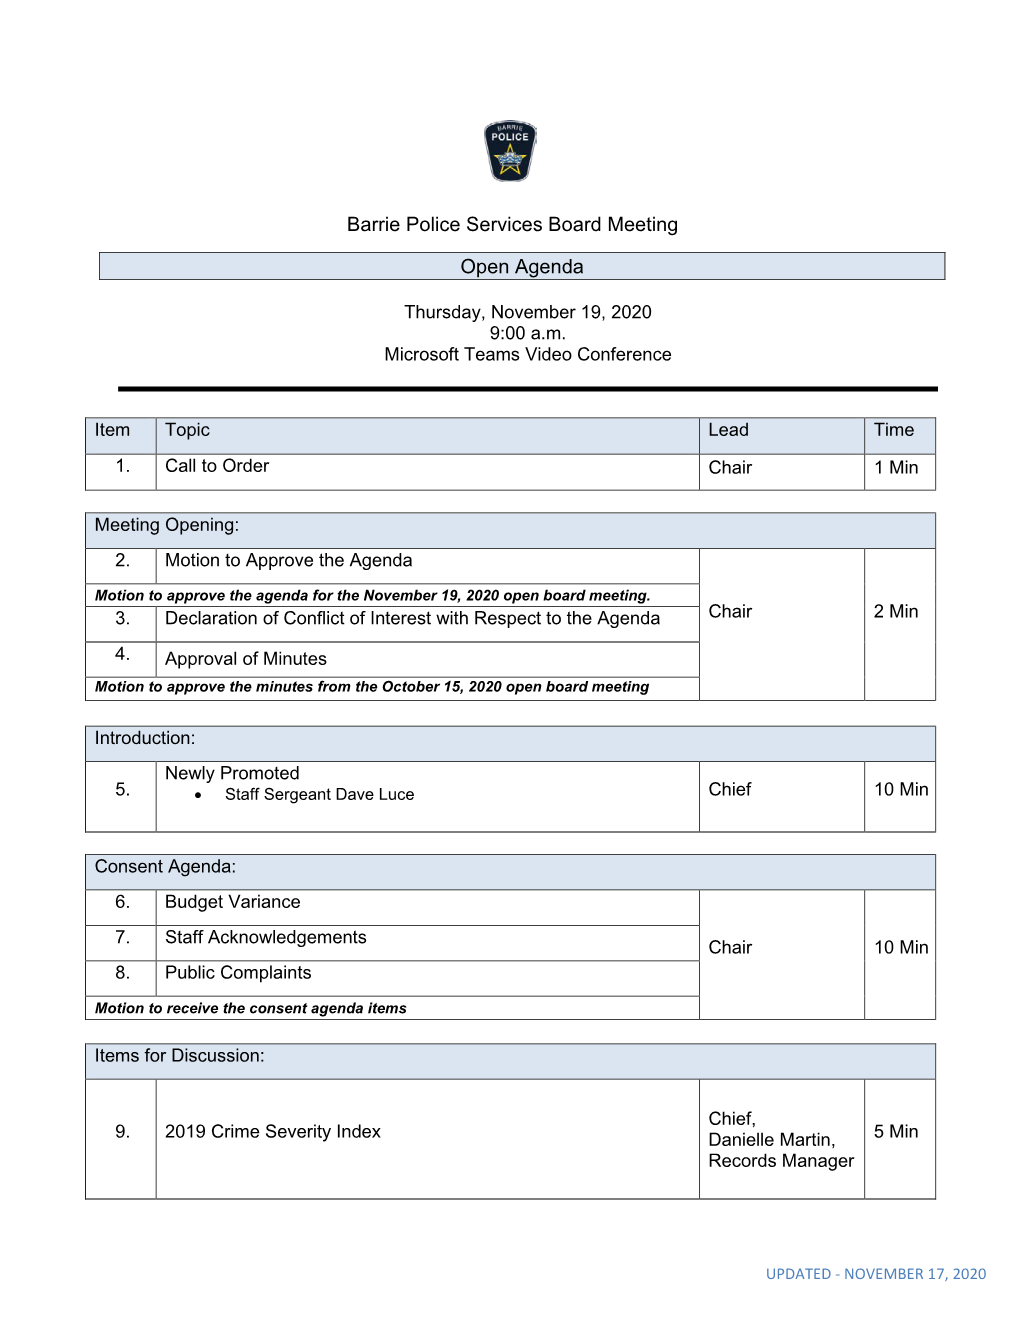 Barrie Police Services Board Meeting Open Agenda